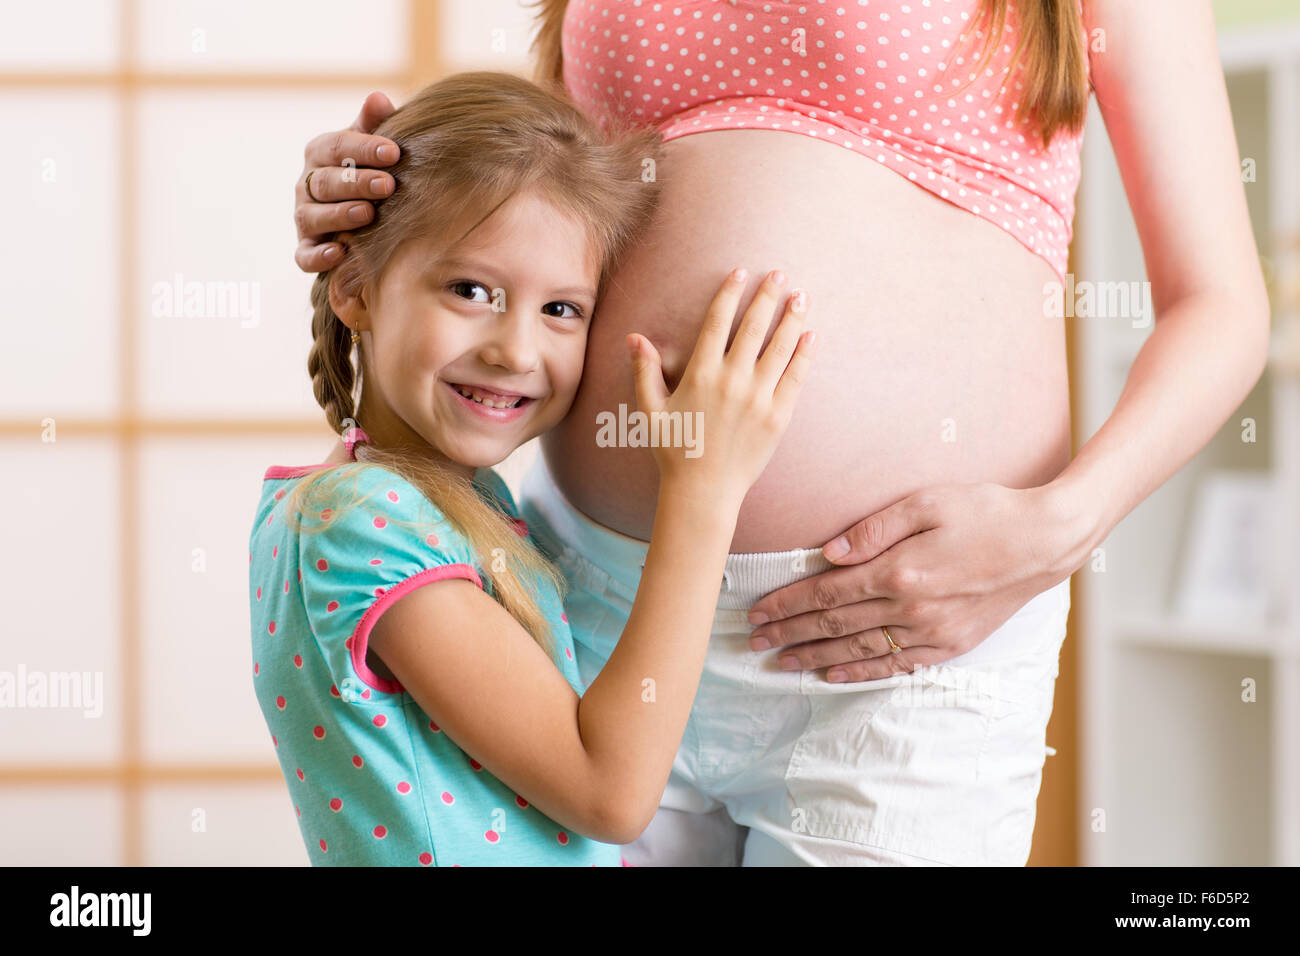 happy kid hugging pregnant mother belly Stock Photo